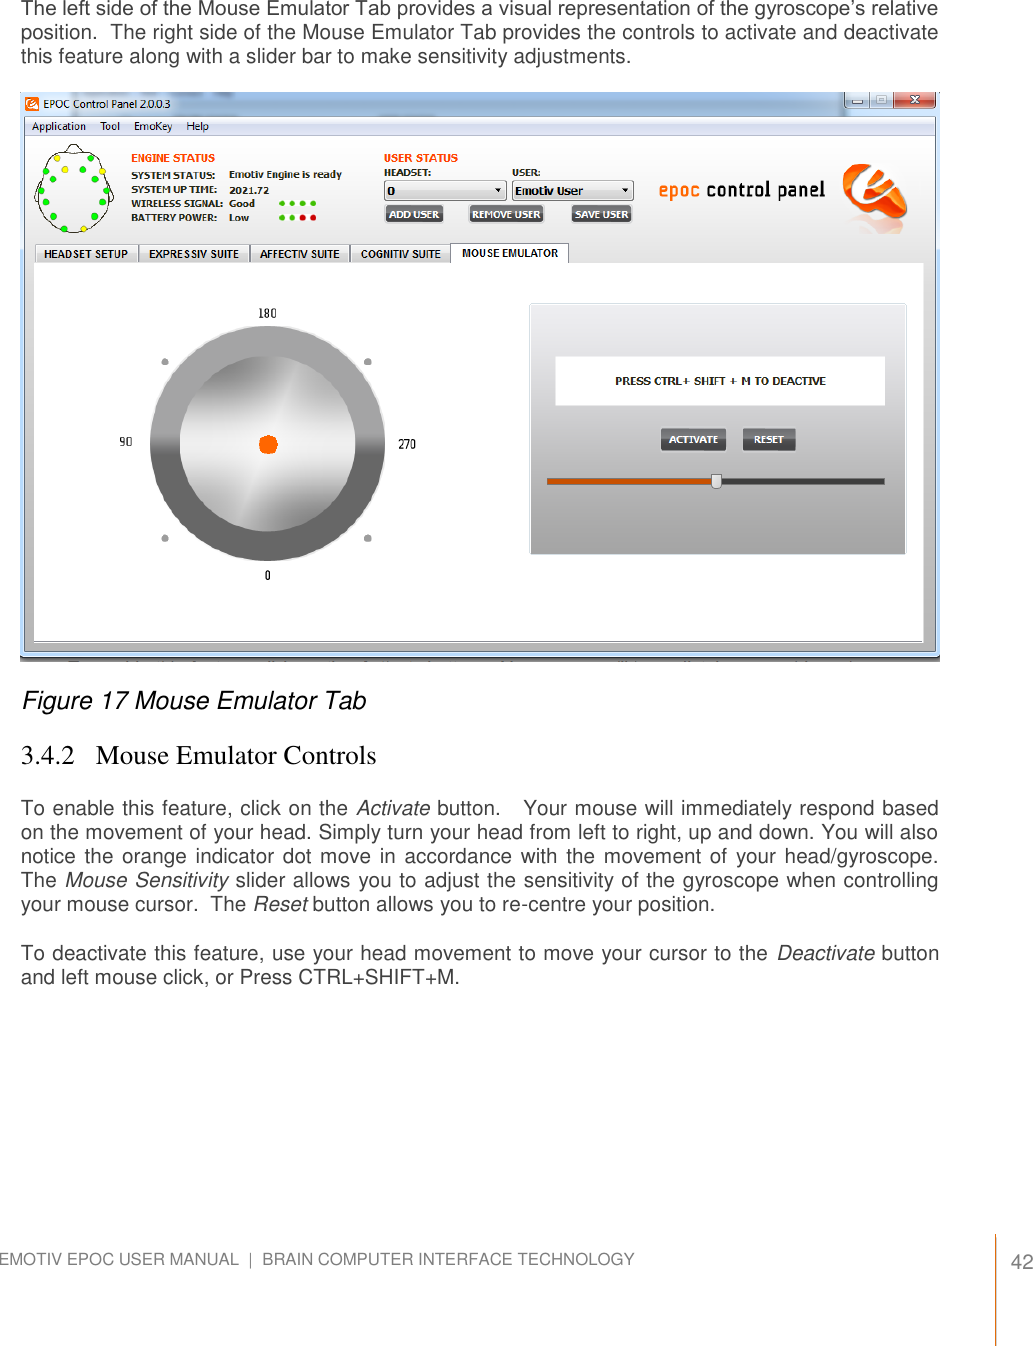   42 EMOTIV EPOC USER MANUAL  |  BRAIN COMPUTER INTERFACE TECHNOLOGY    The left side of the Mouse Emulator Tab provides a visual representation of the gyroscope’s relative position.  The right side of the Mouse Emulator Tab provides the controls to activate and deactivate this feature along with a slider bar to make sensitivity adjustments.    Figure 17 Mouse Emulator Tab 3.4.2  Mouse Emulator Controls To enable this feature, click on the Activate button.   Your mouse will immediately respond based on the movement of your head. Simply turn your head from left to right, up and down. You will also notice the orange indicator dot move in accordance with the movement of  your head/gyroscope.  The Mouse Sensitivity slider allows you to adjust the sensitivity of the gyroscope when controlling your mouse cursor.  The Reset button allows you to re-centre your position.   To deactivate this feature, use your head movement to move your cursor to the Deactivate button and left mouse click, or Press CTRL+SHIFT+M.  